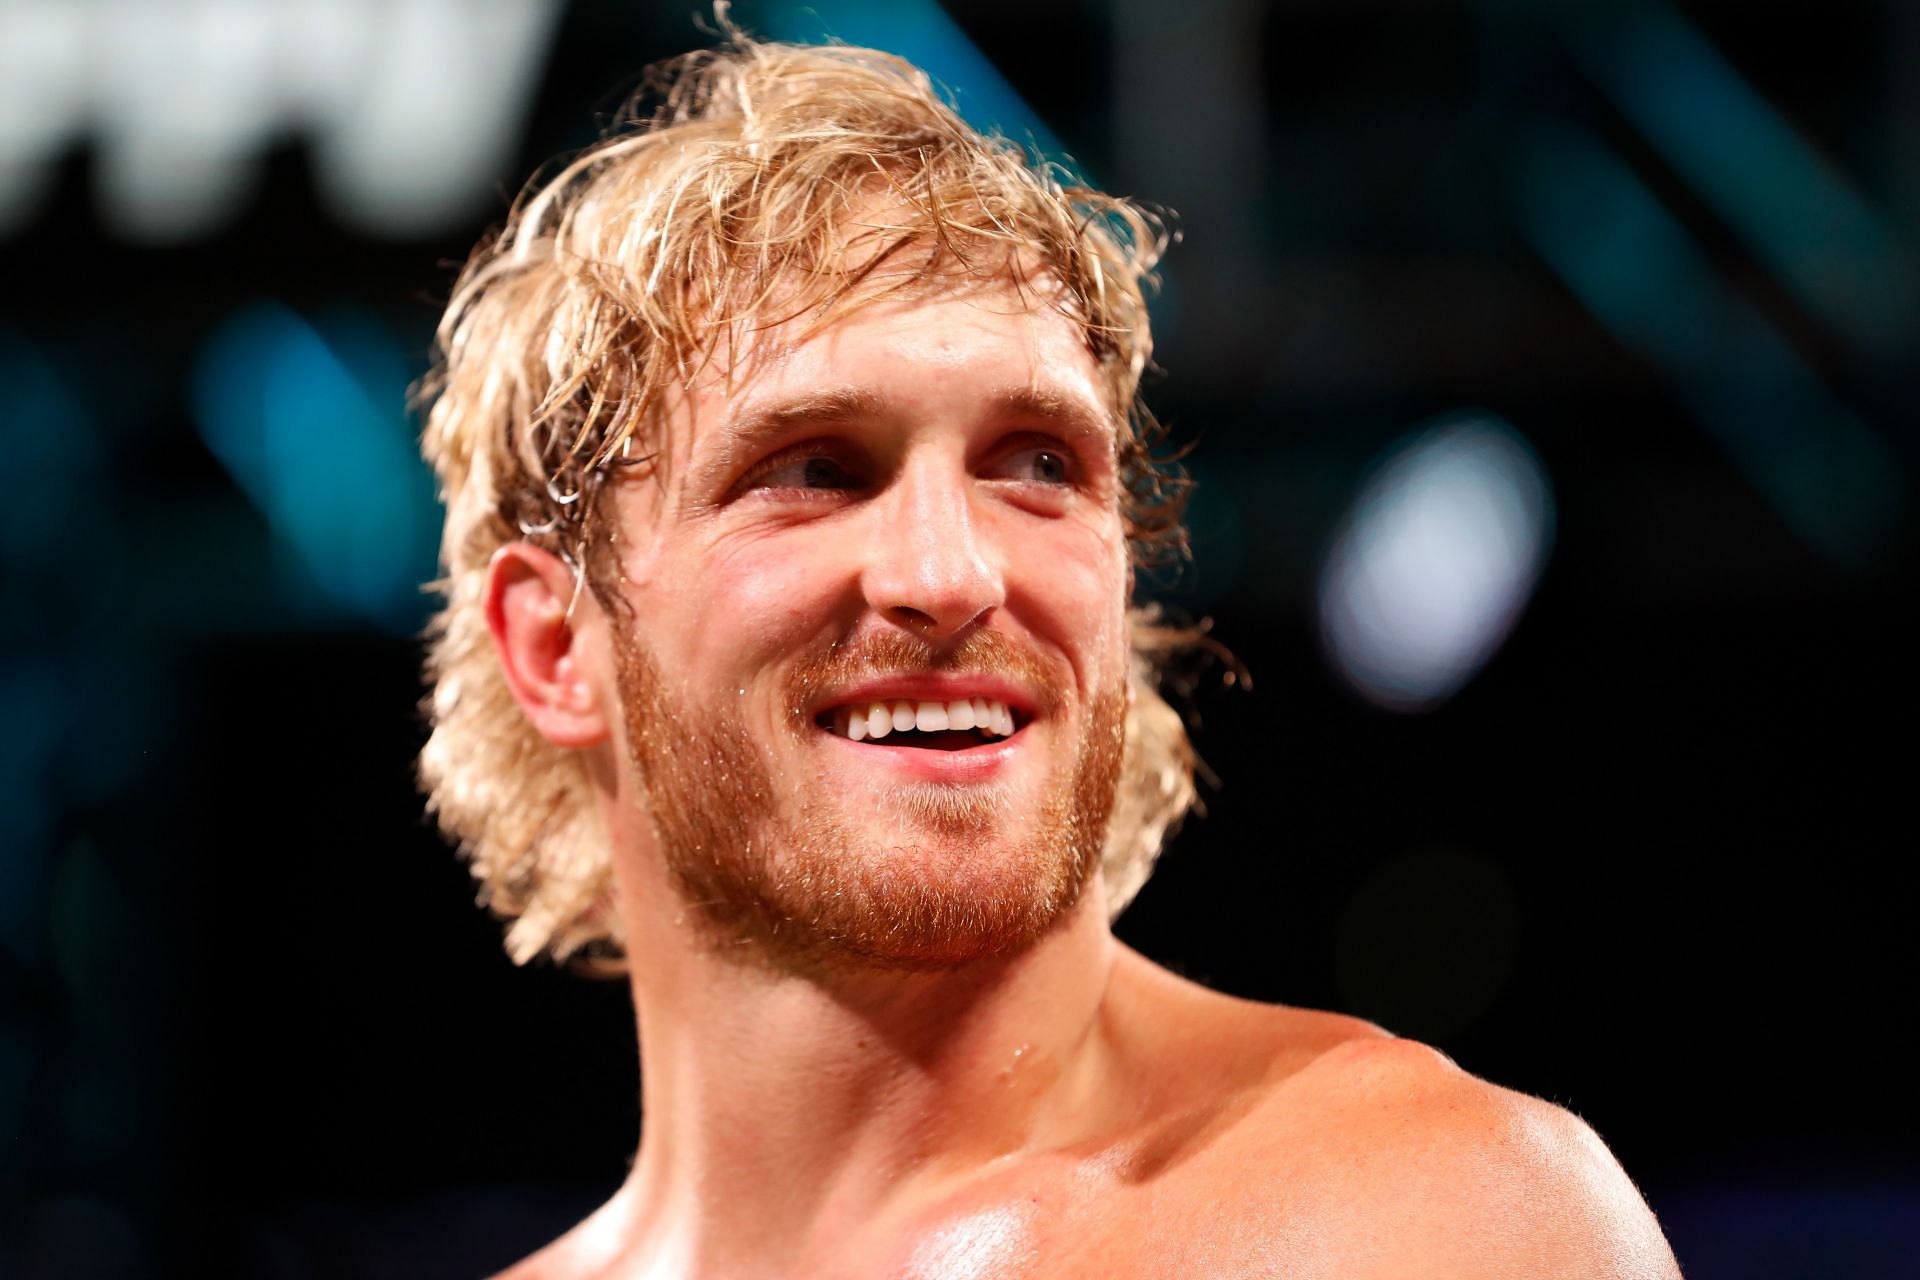 Logan Paul holds a professional boxing record of 0-1